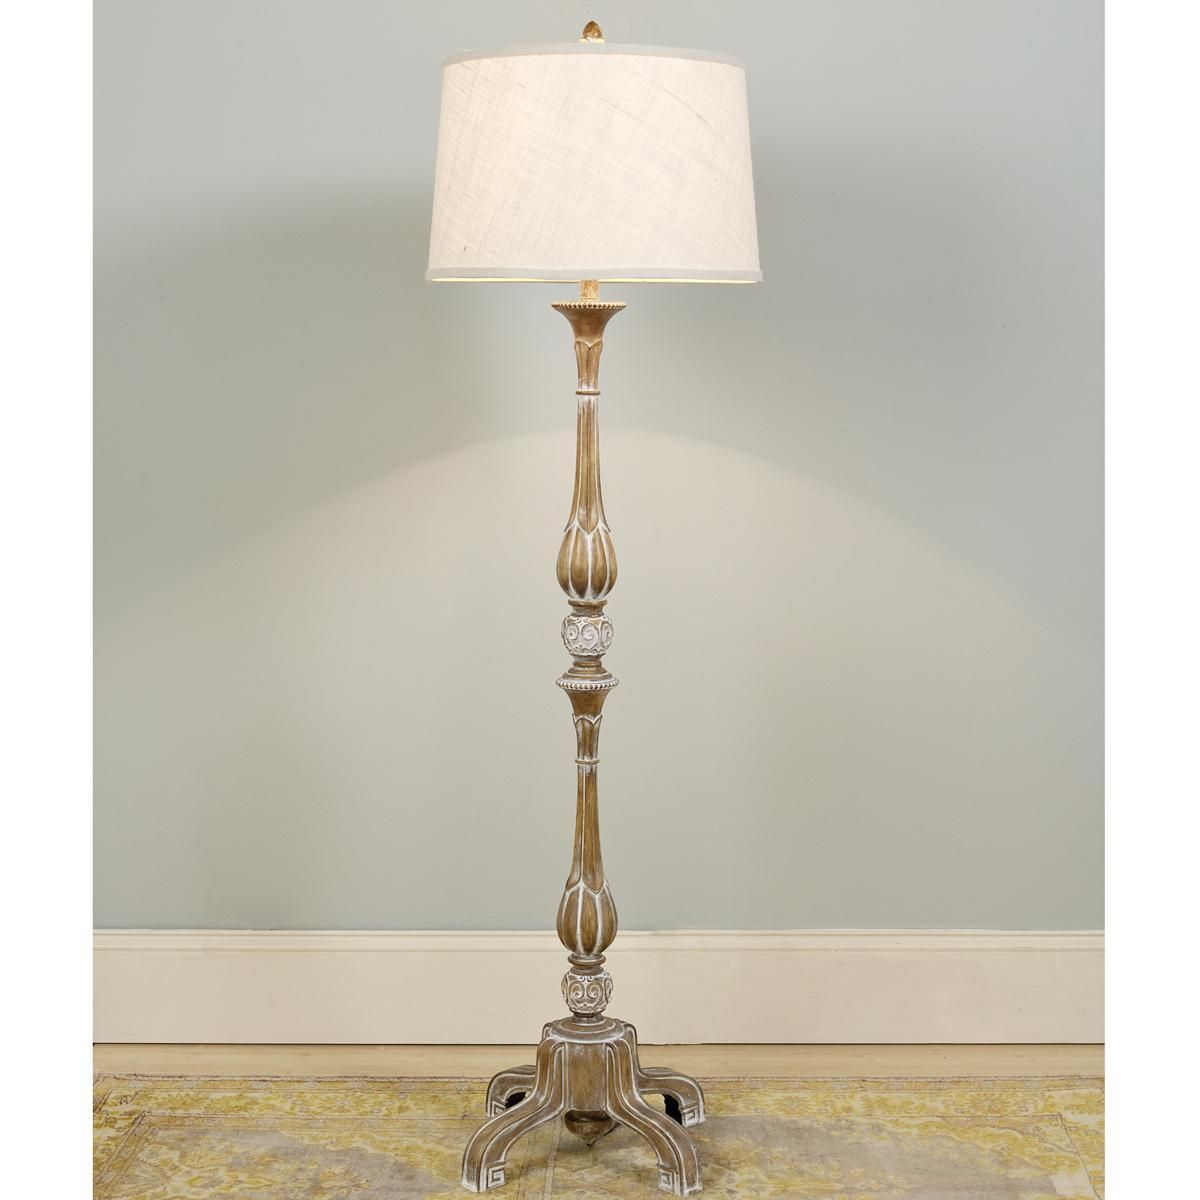 French Provincial Pickled Wood Floor Lamp Shades Of Light in dimensions 1200 X 1200